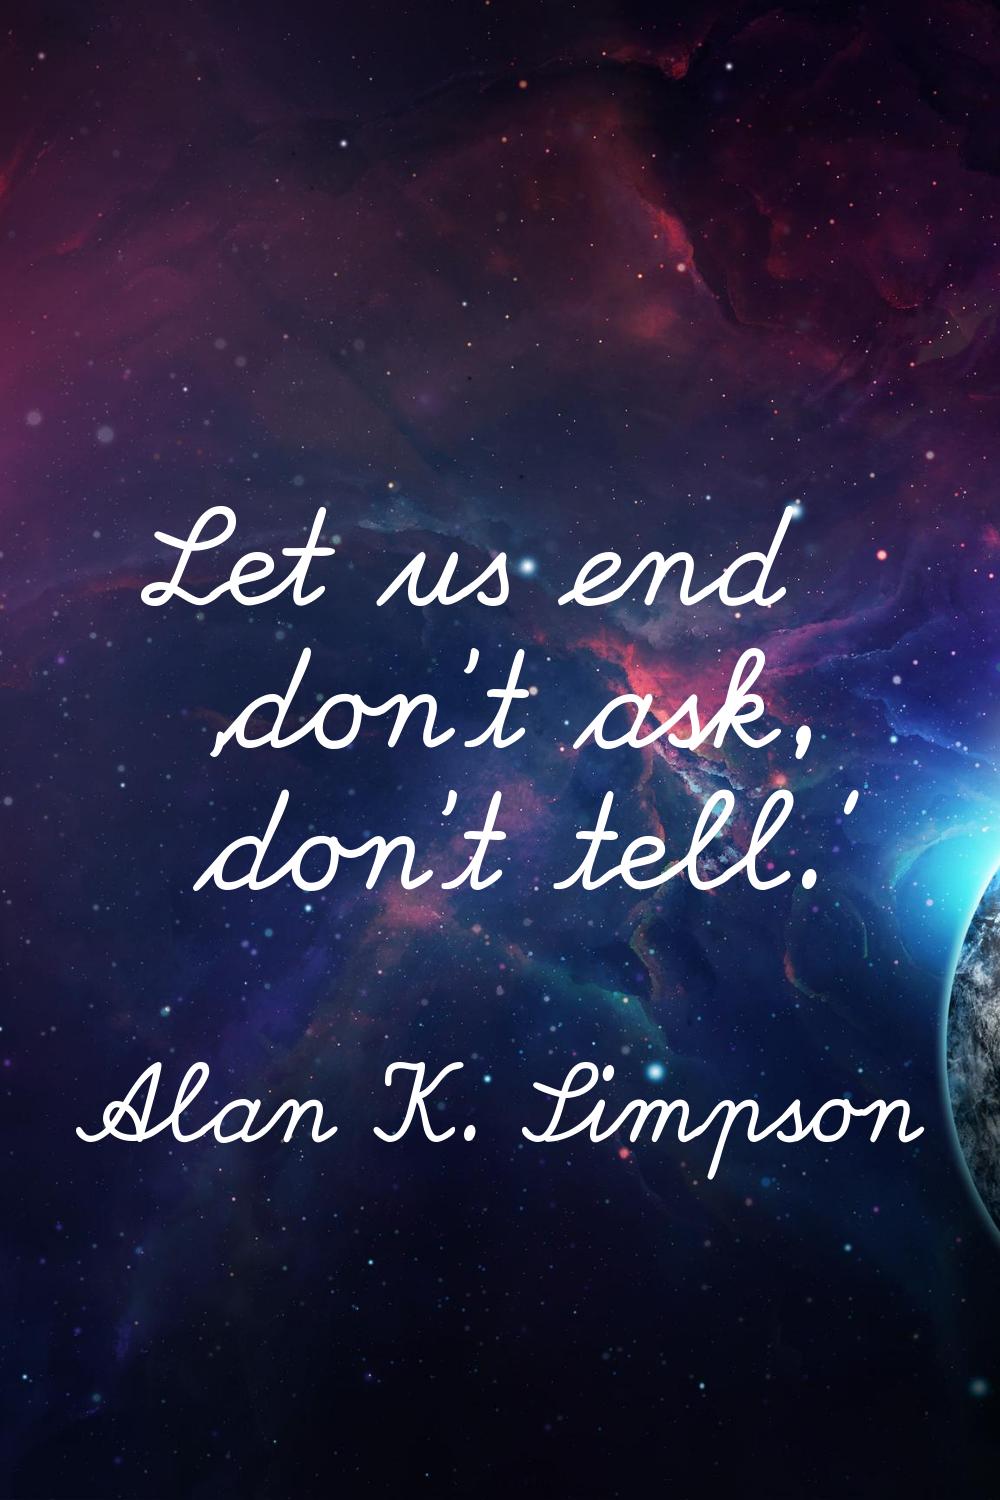 Let us end 'don't ask, don't tell.'